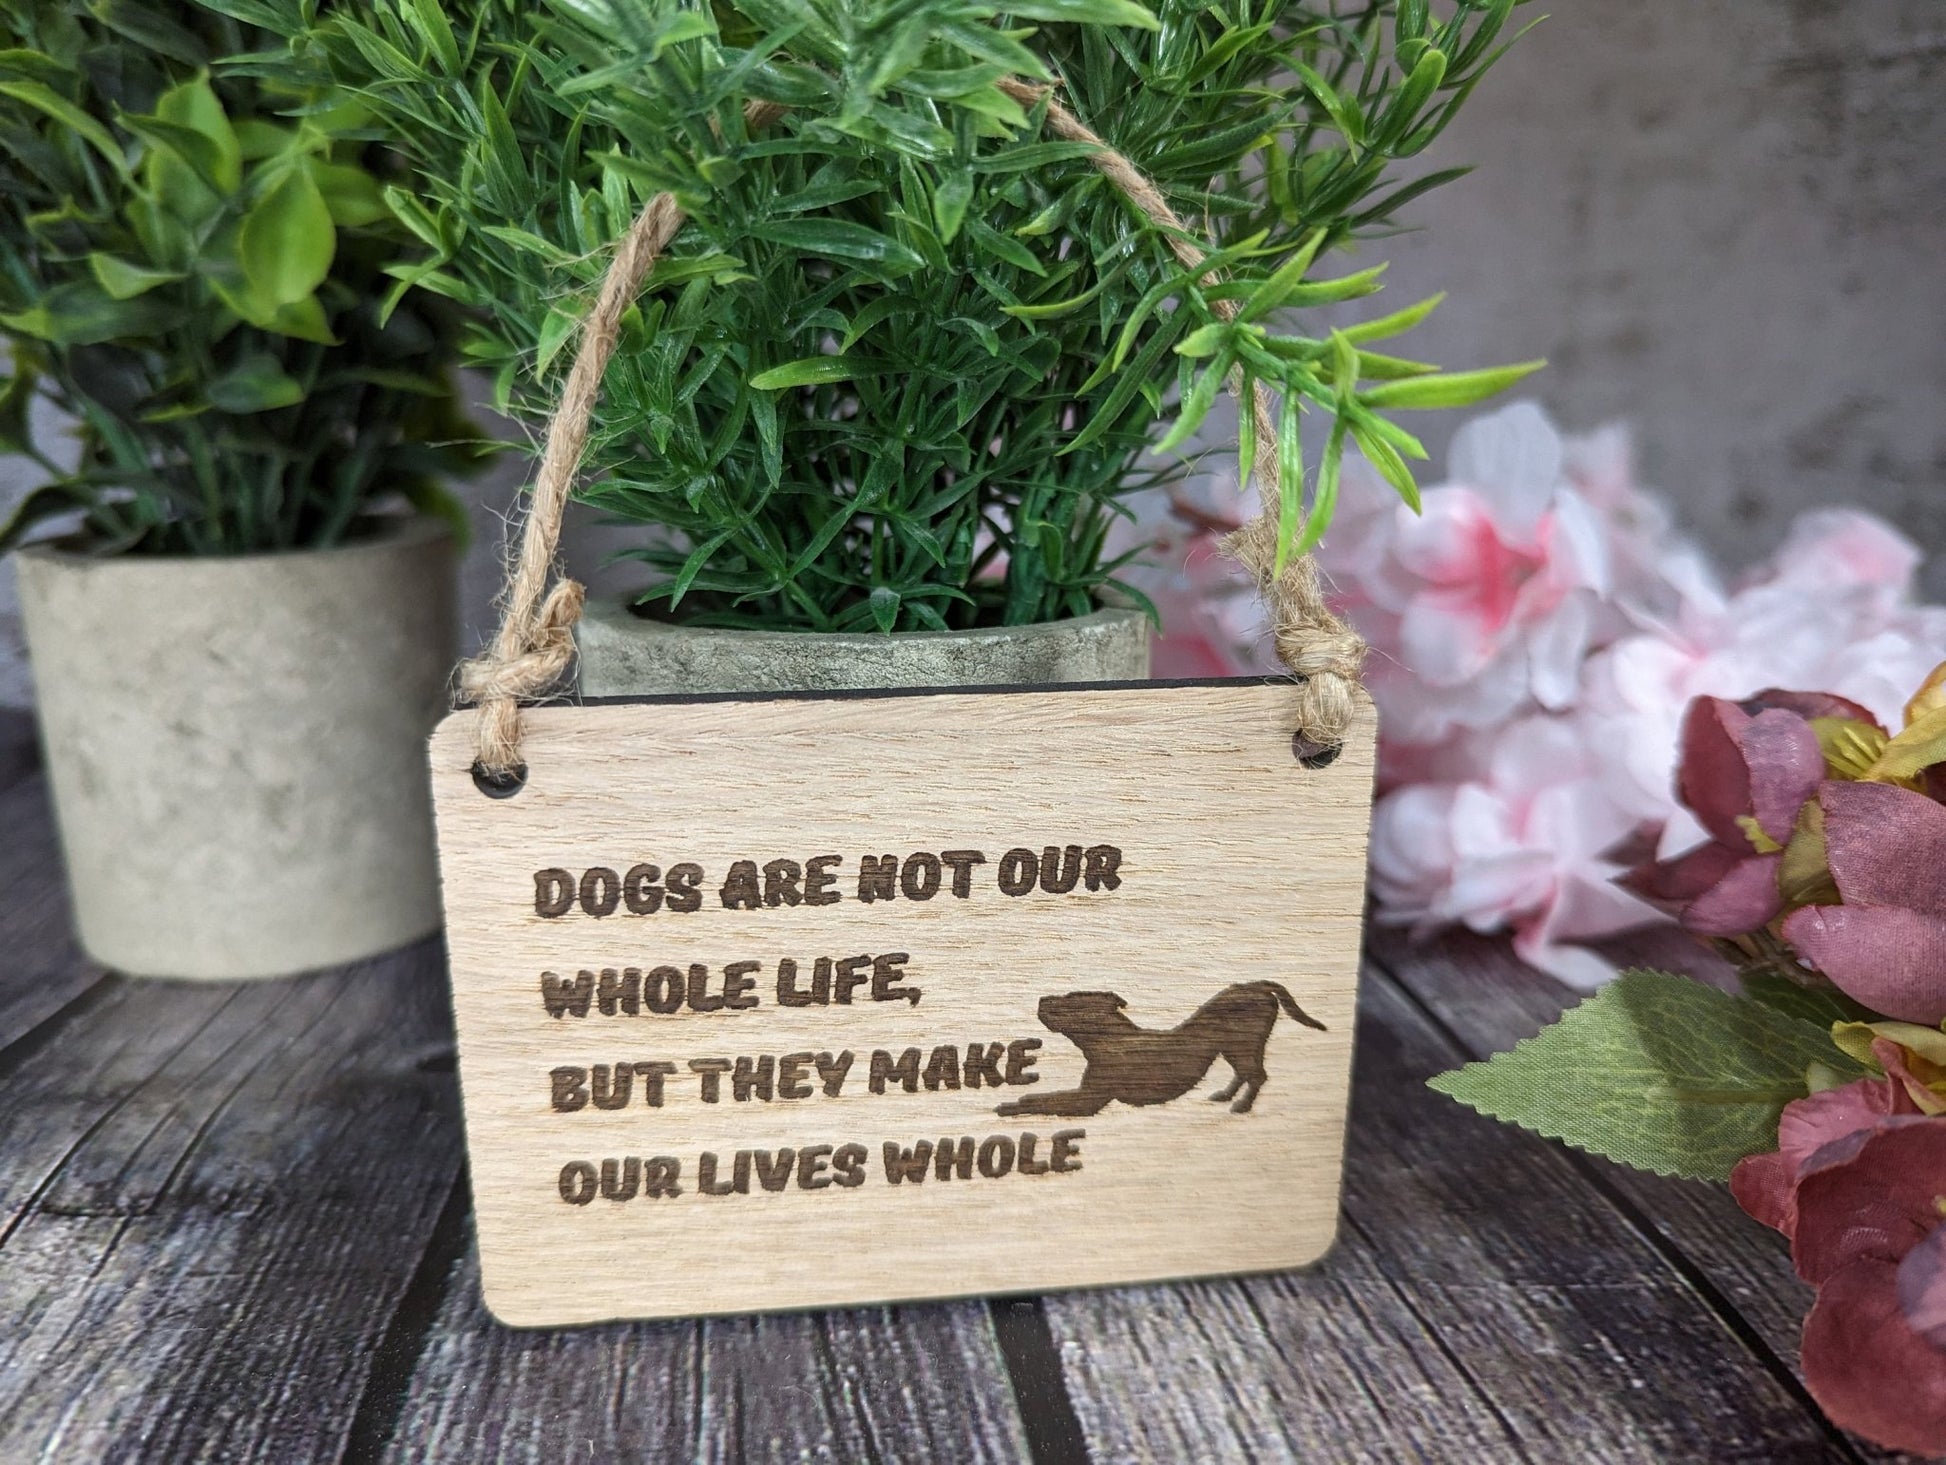 Dogs Are Not Our Whole Life, But They Make Our Life Whole, Wooden Sign | Wooden Hanging Sign for Dog Lovers | Doggy Birthday Gift - CherryGroveCraft